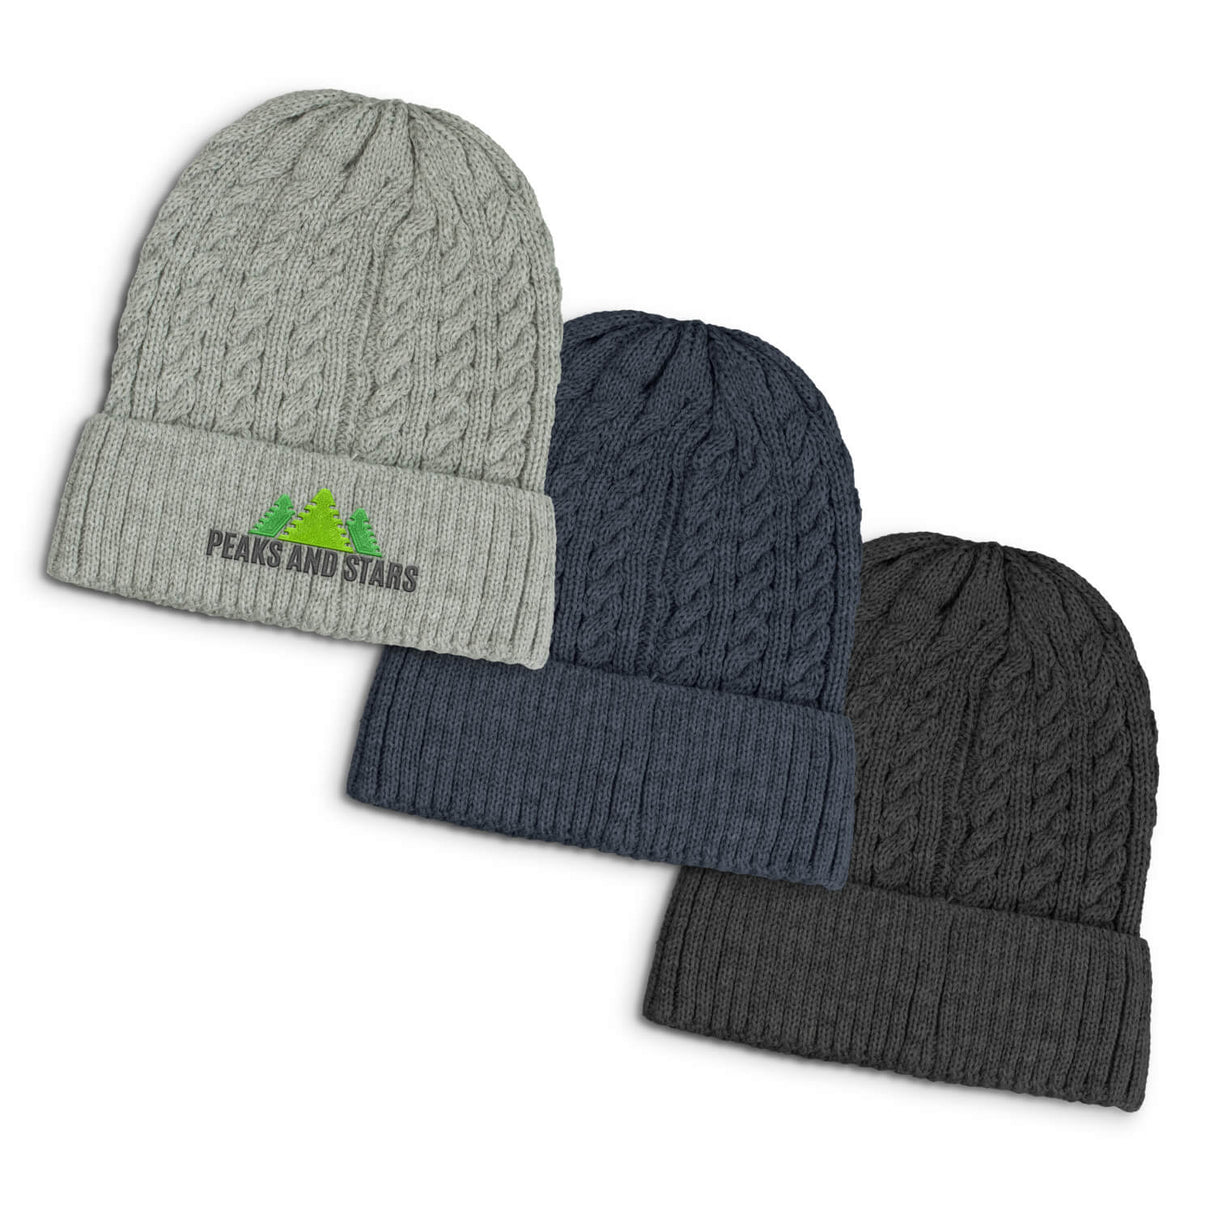 Altitude Knit Beanie - Embroidered